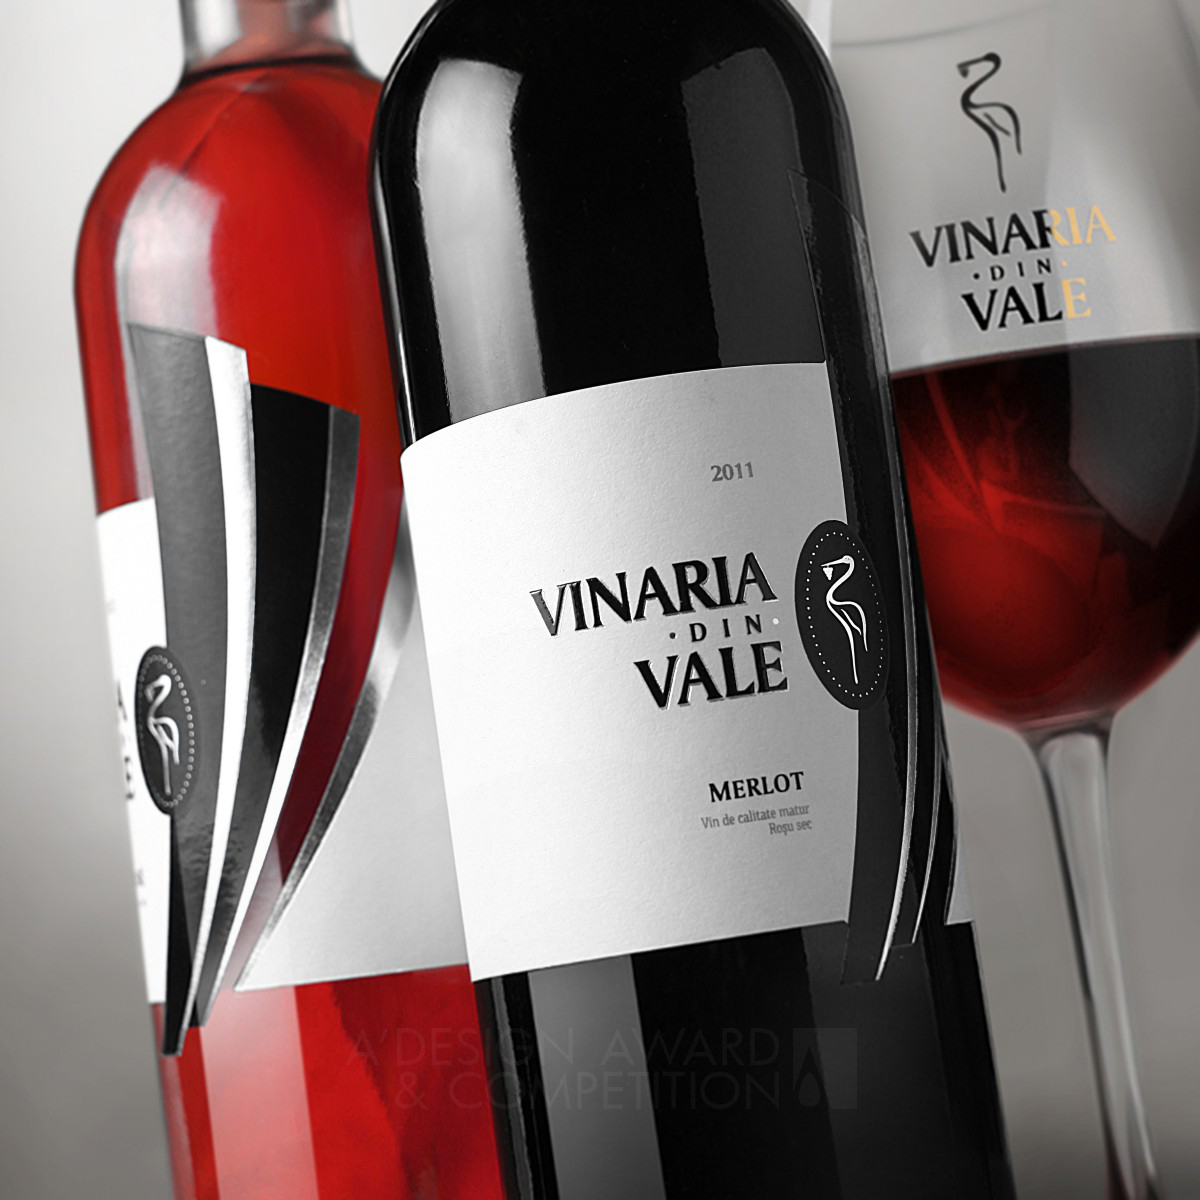 Vinaria din Vale Series of quality wines by Valerii Sumilov